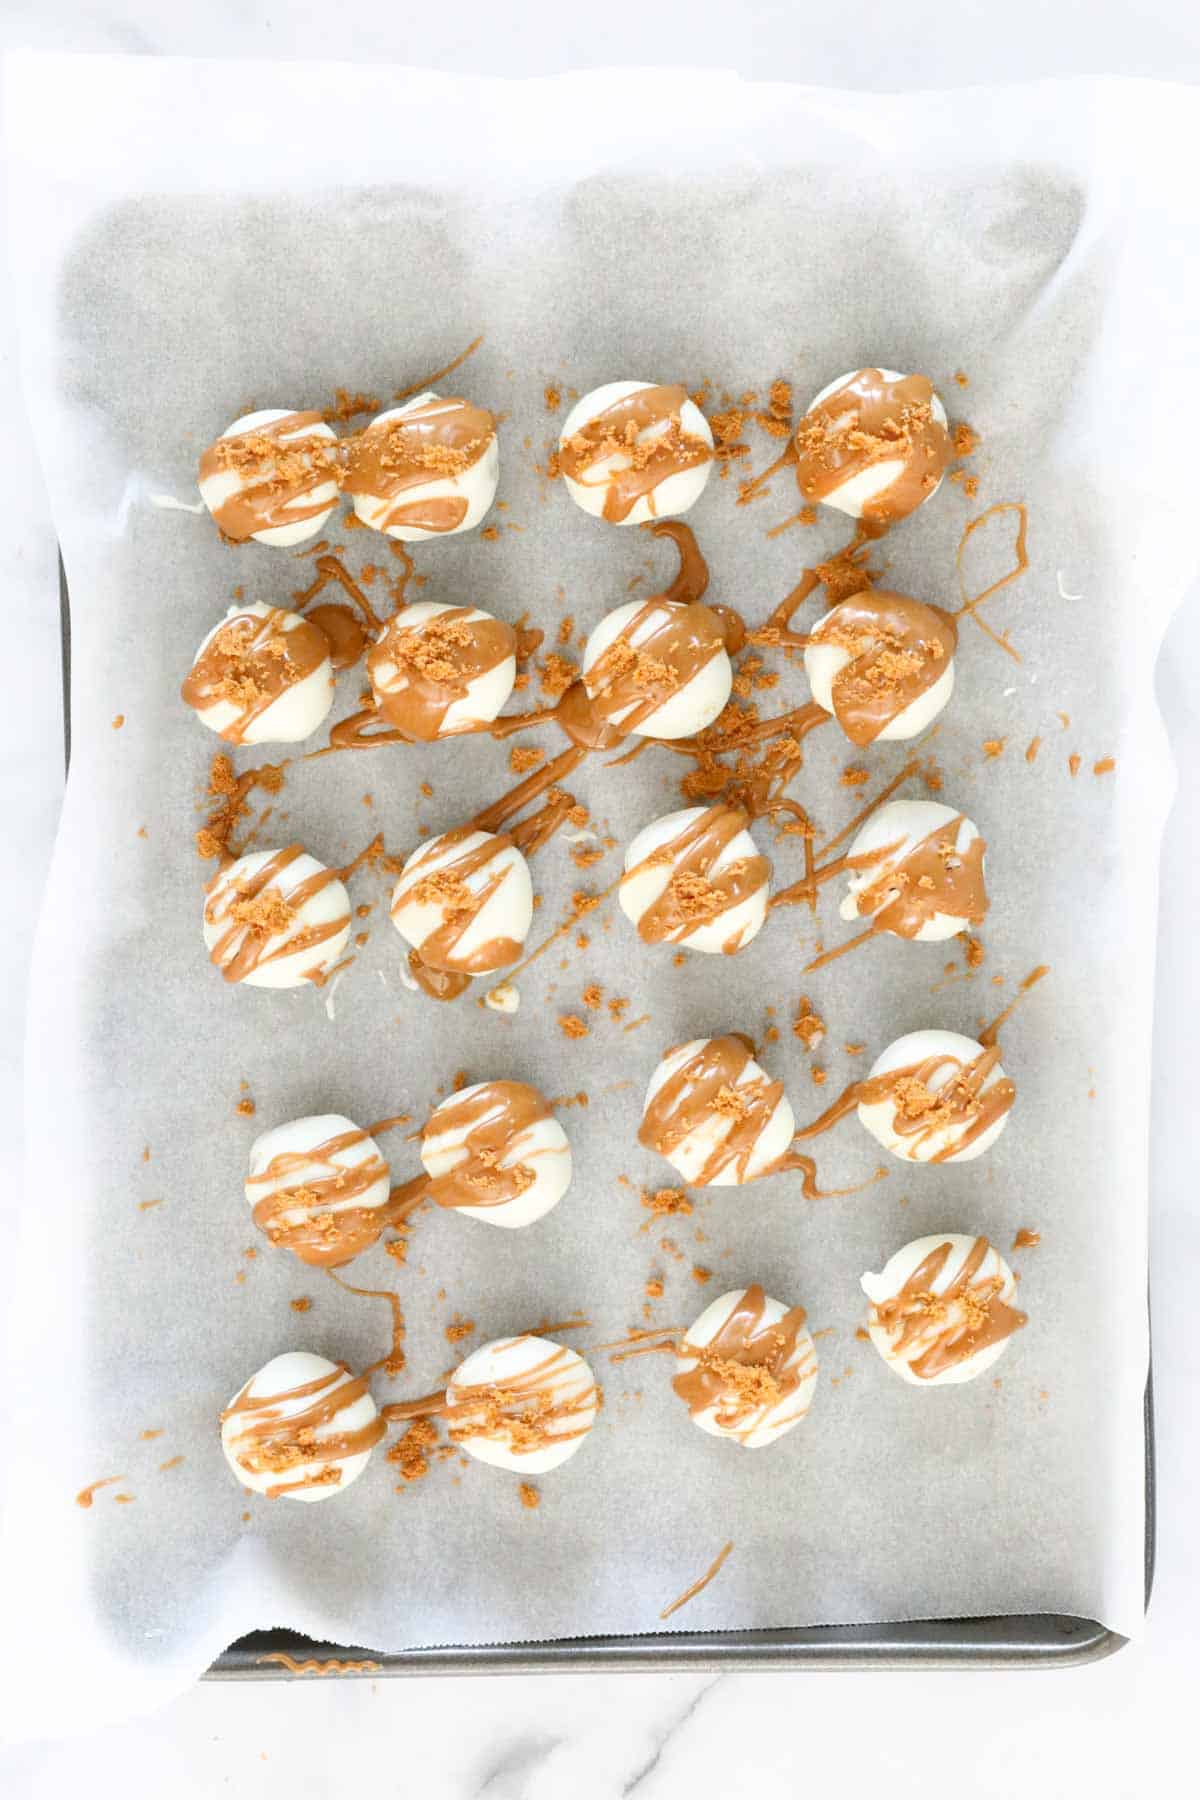 Truffles on the tray dipped in melted white chocolate, drizzled with Biscoff spread and sprinkled with crushed biscuits.